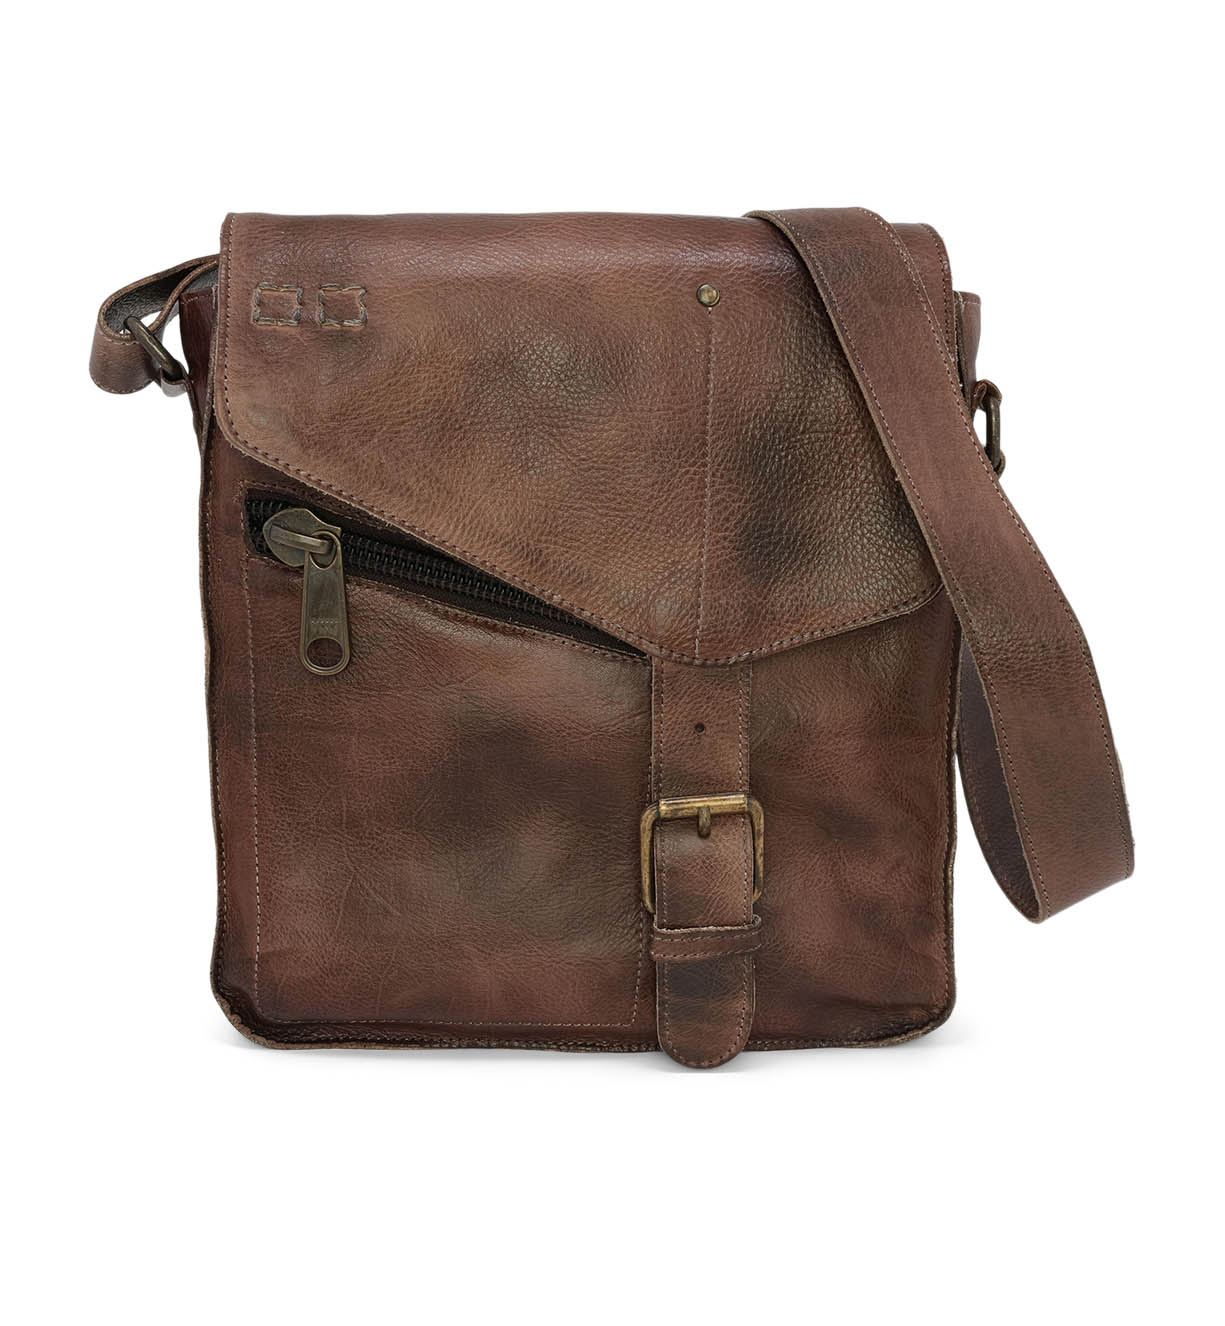 The Venice Beach men's leather messenger bag with a bohemian-inspired design by Bed Stu.